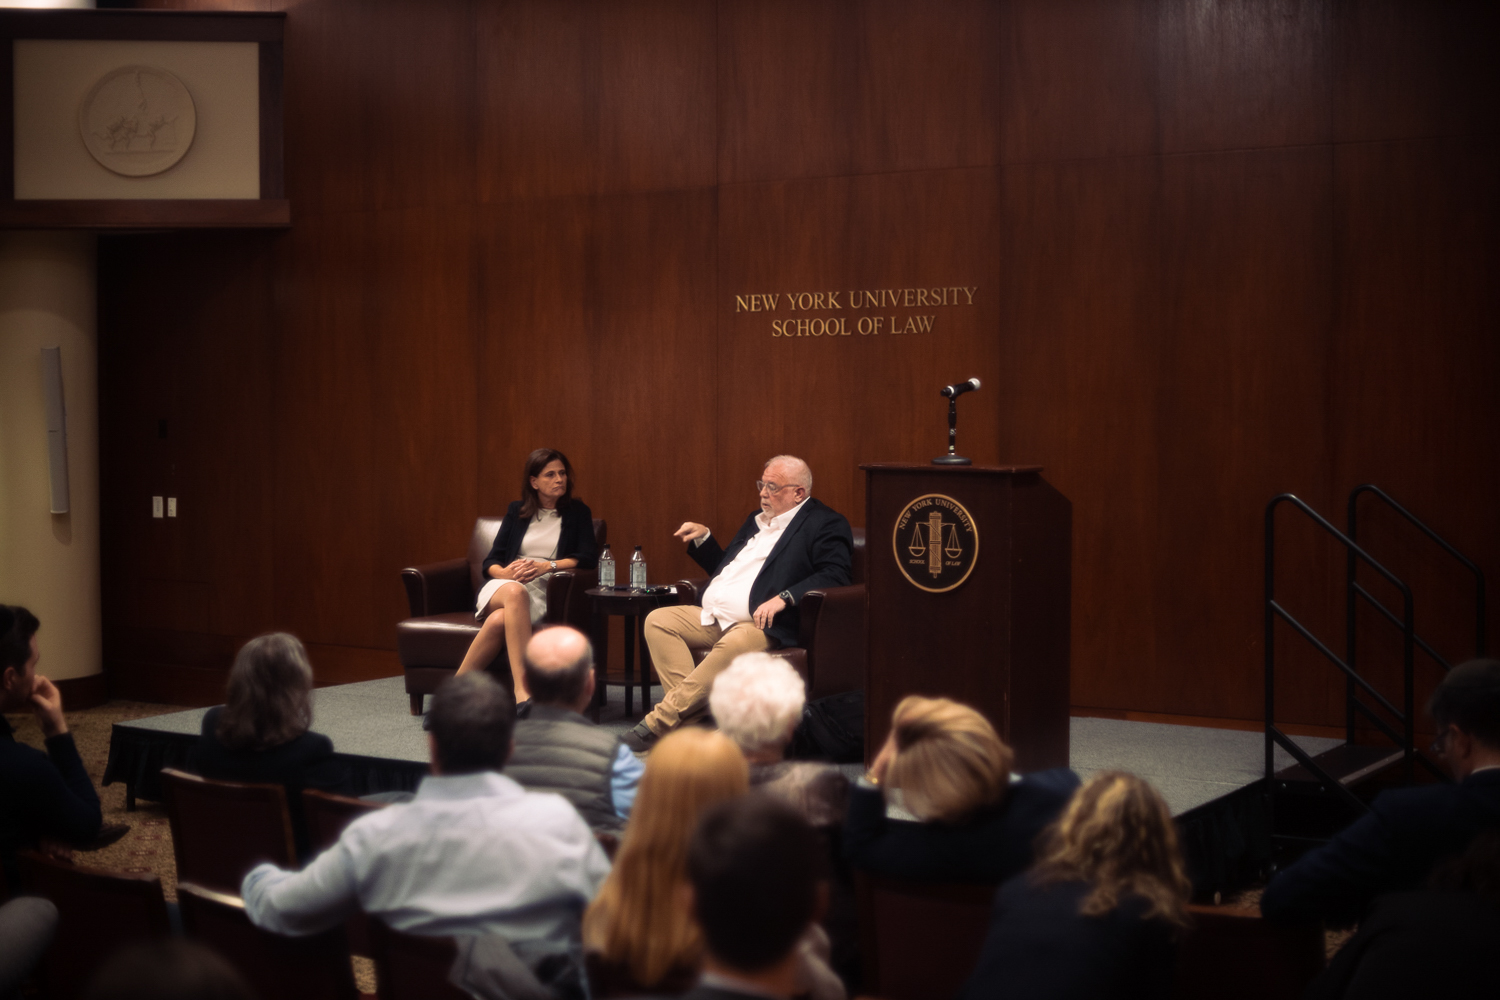 Two speakers sit on a stage in an N.Y.U. Law auditorium. To the left is Michal Cotler-Wunsh. To the right is Robert Howse, a professor.